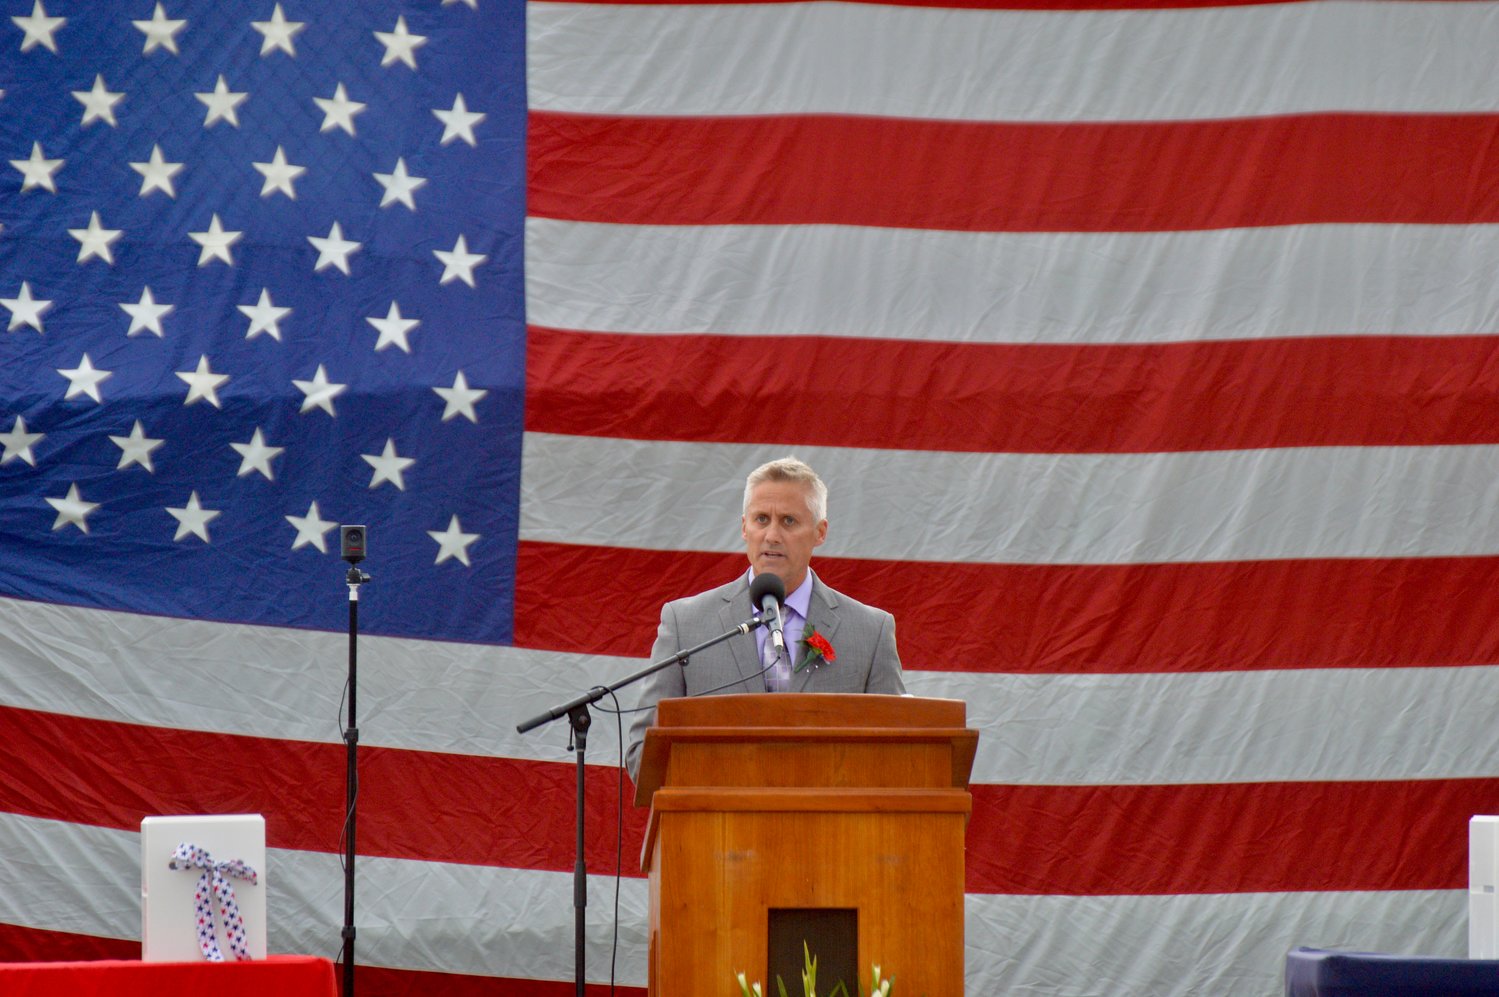 Guest speaker Rusty Forgue addresses graduates as a giant American flag provides the backdrop.